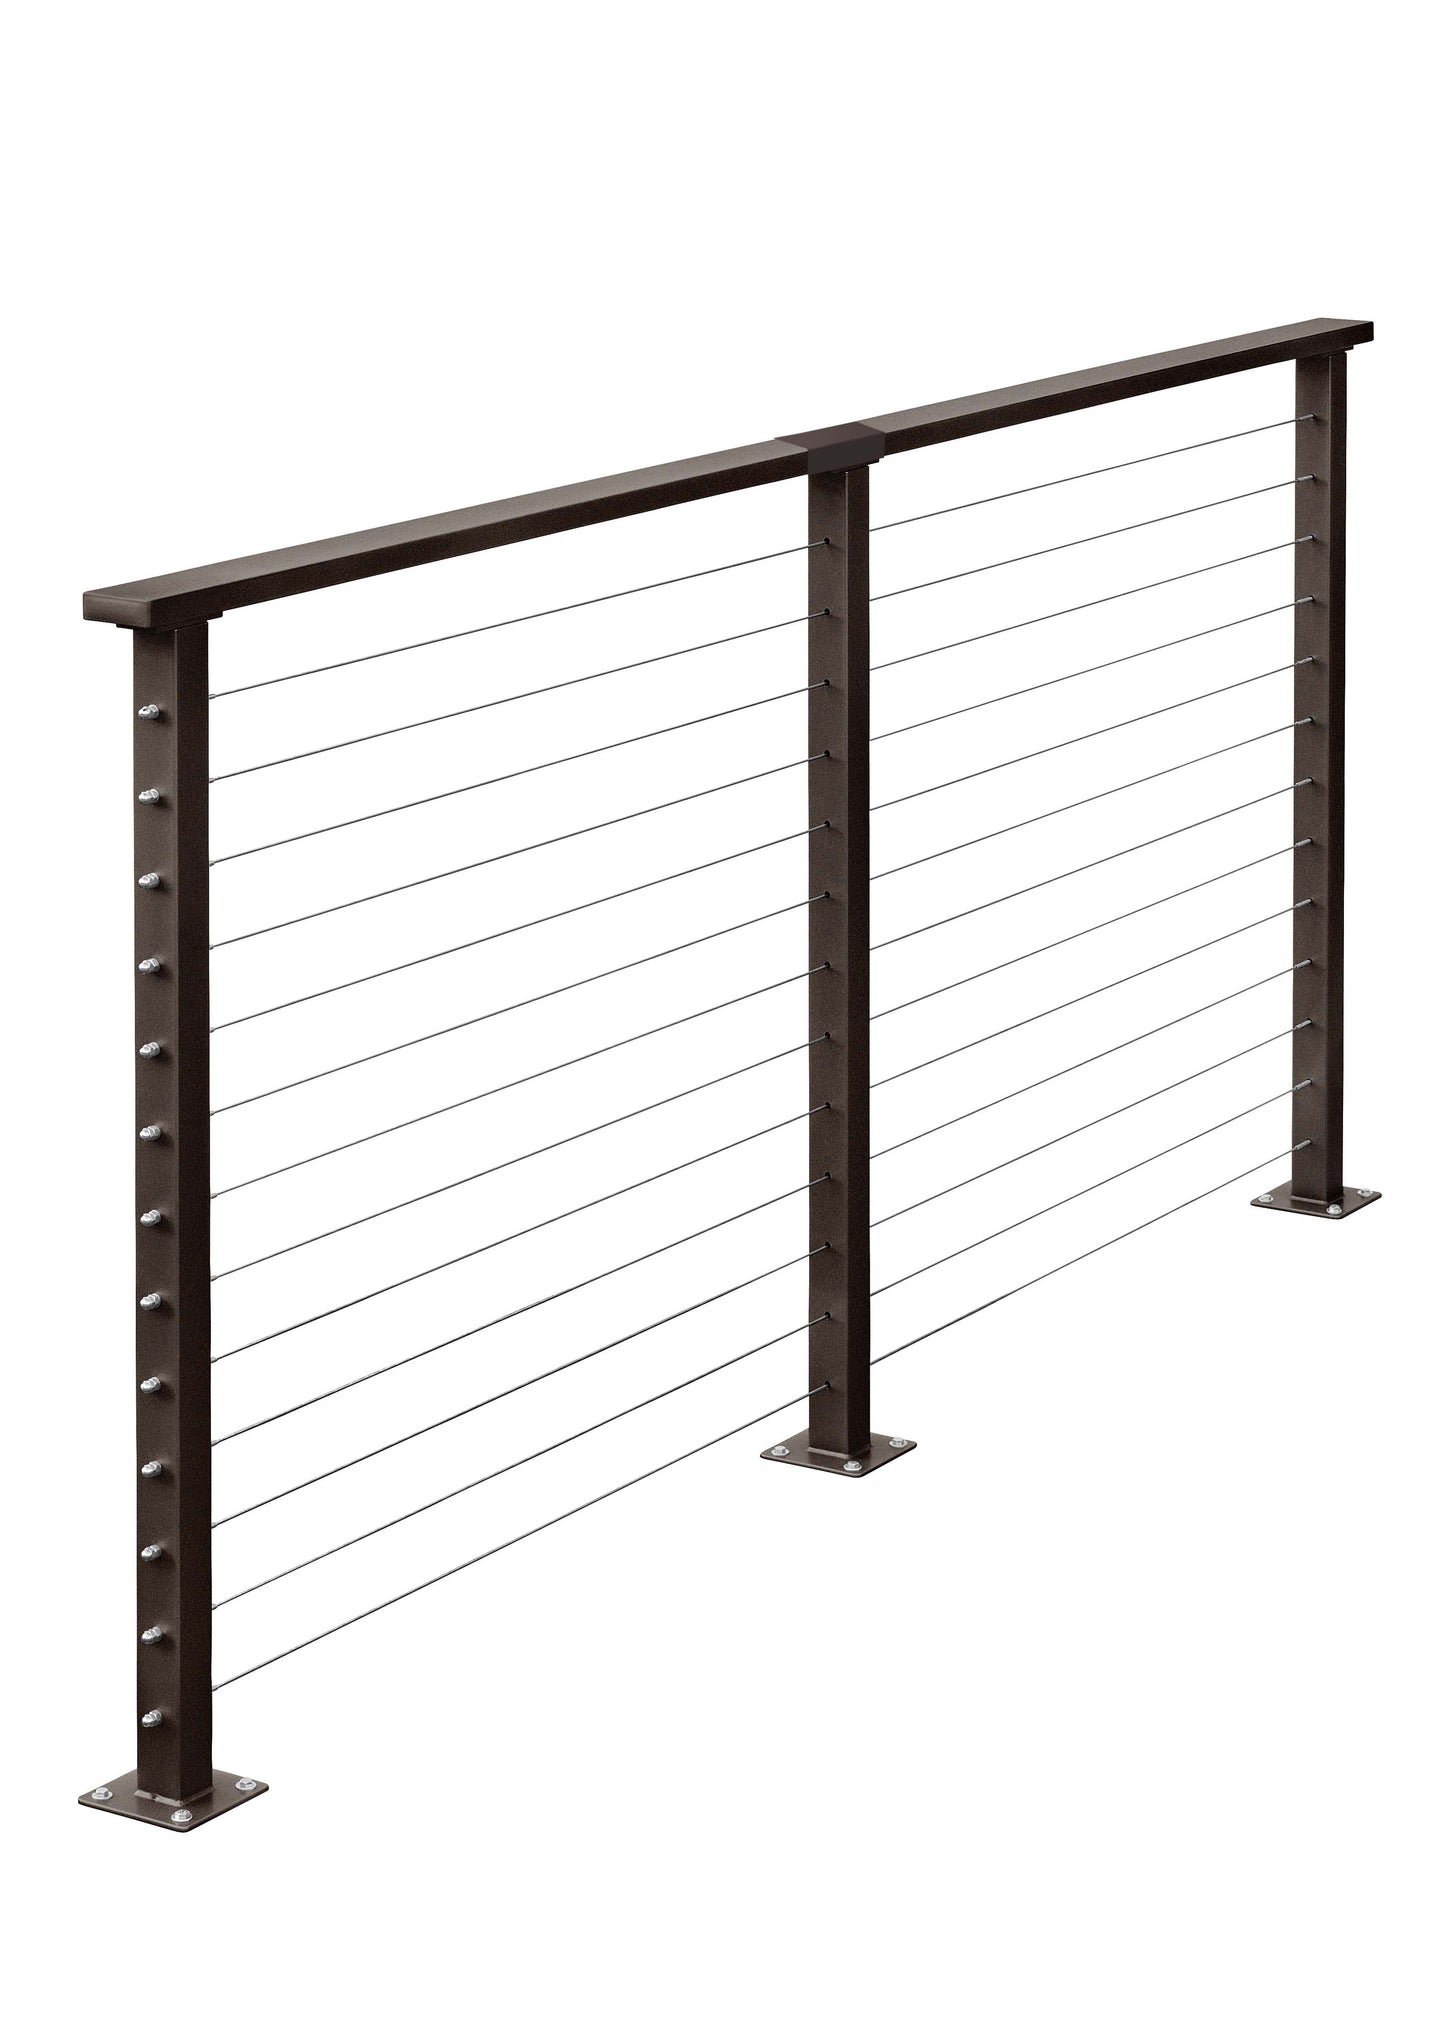 11 ft. Deck Cable Railing, 42 in. Base Mount, Bronze